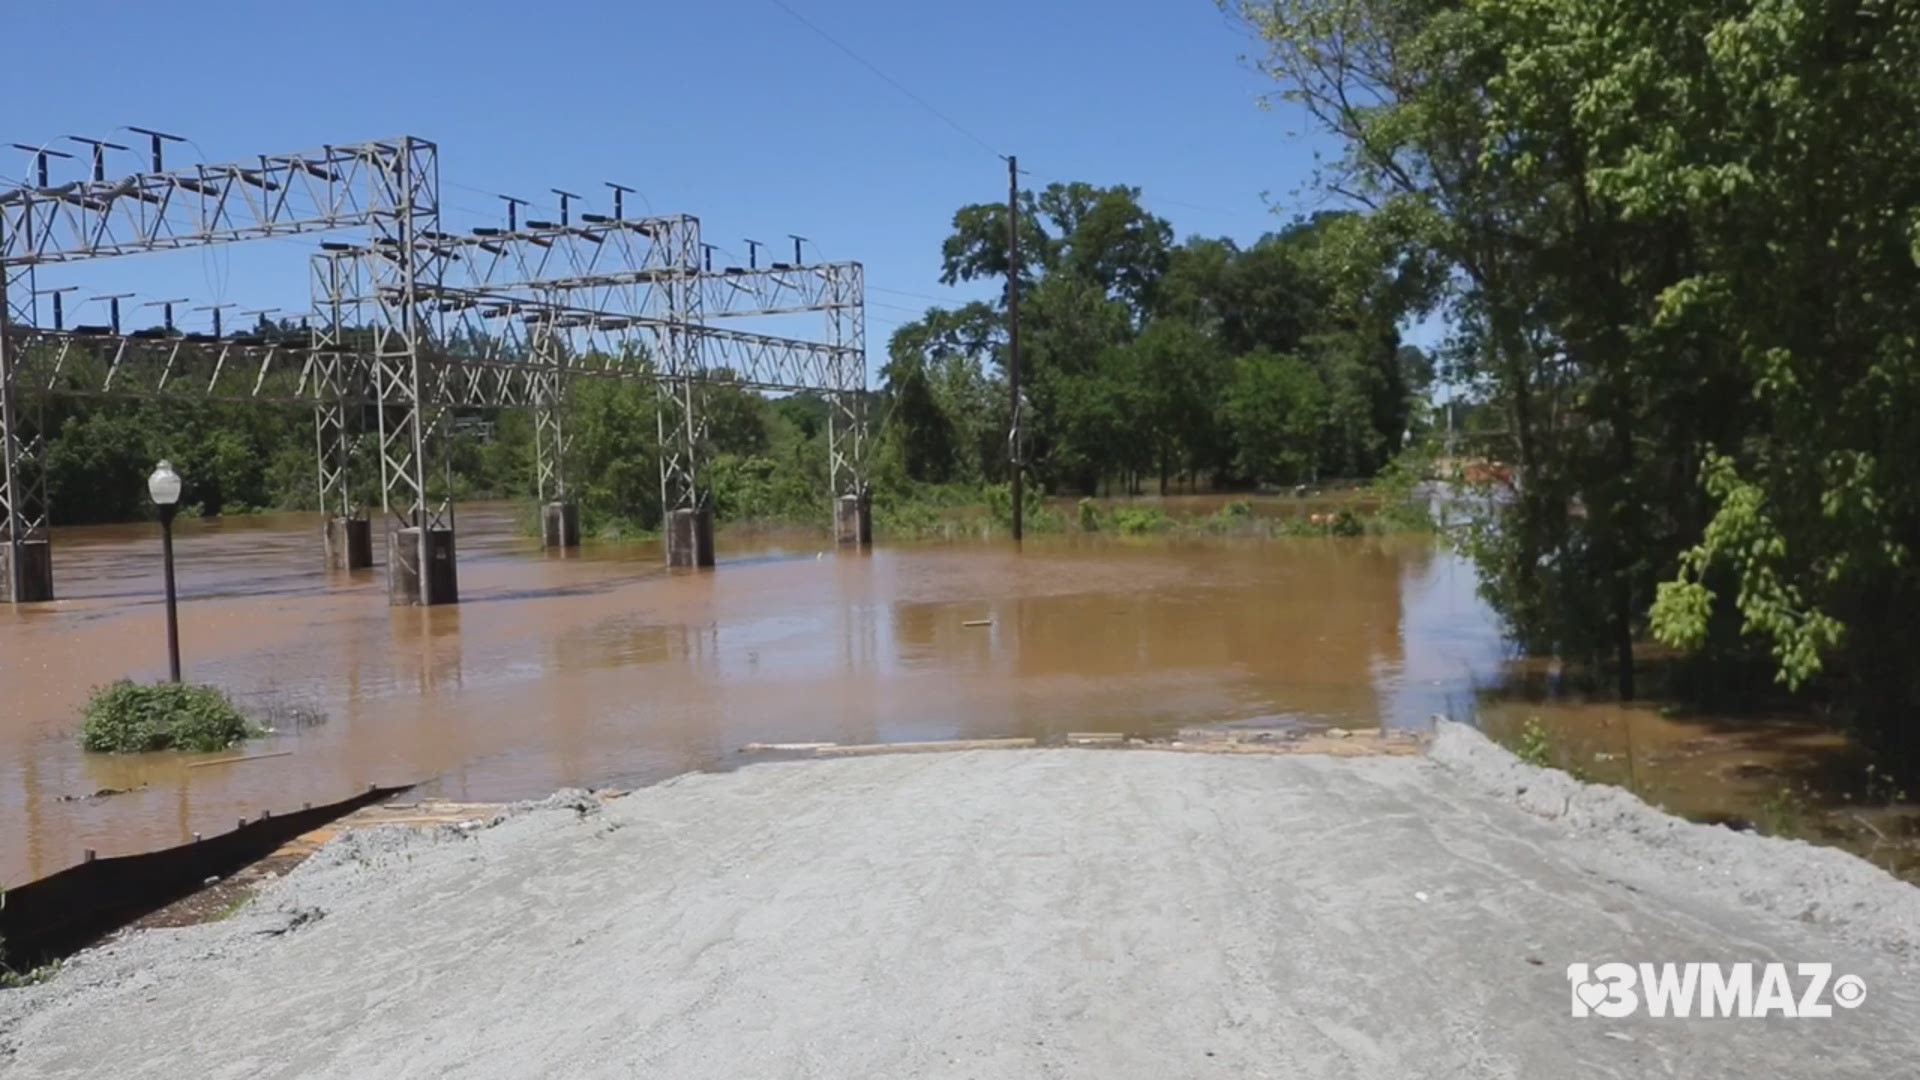 Macon-Bibb EMA posted on their Twitter and Facebook Sunday morning saying parts of the trail as well as Amerson River Park were closed due to flooding of the Ocmulgee River. The National Weather Service has the river in minor flood stage right now, at around 23 feet.